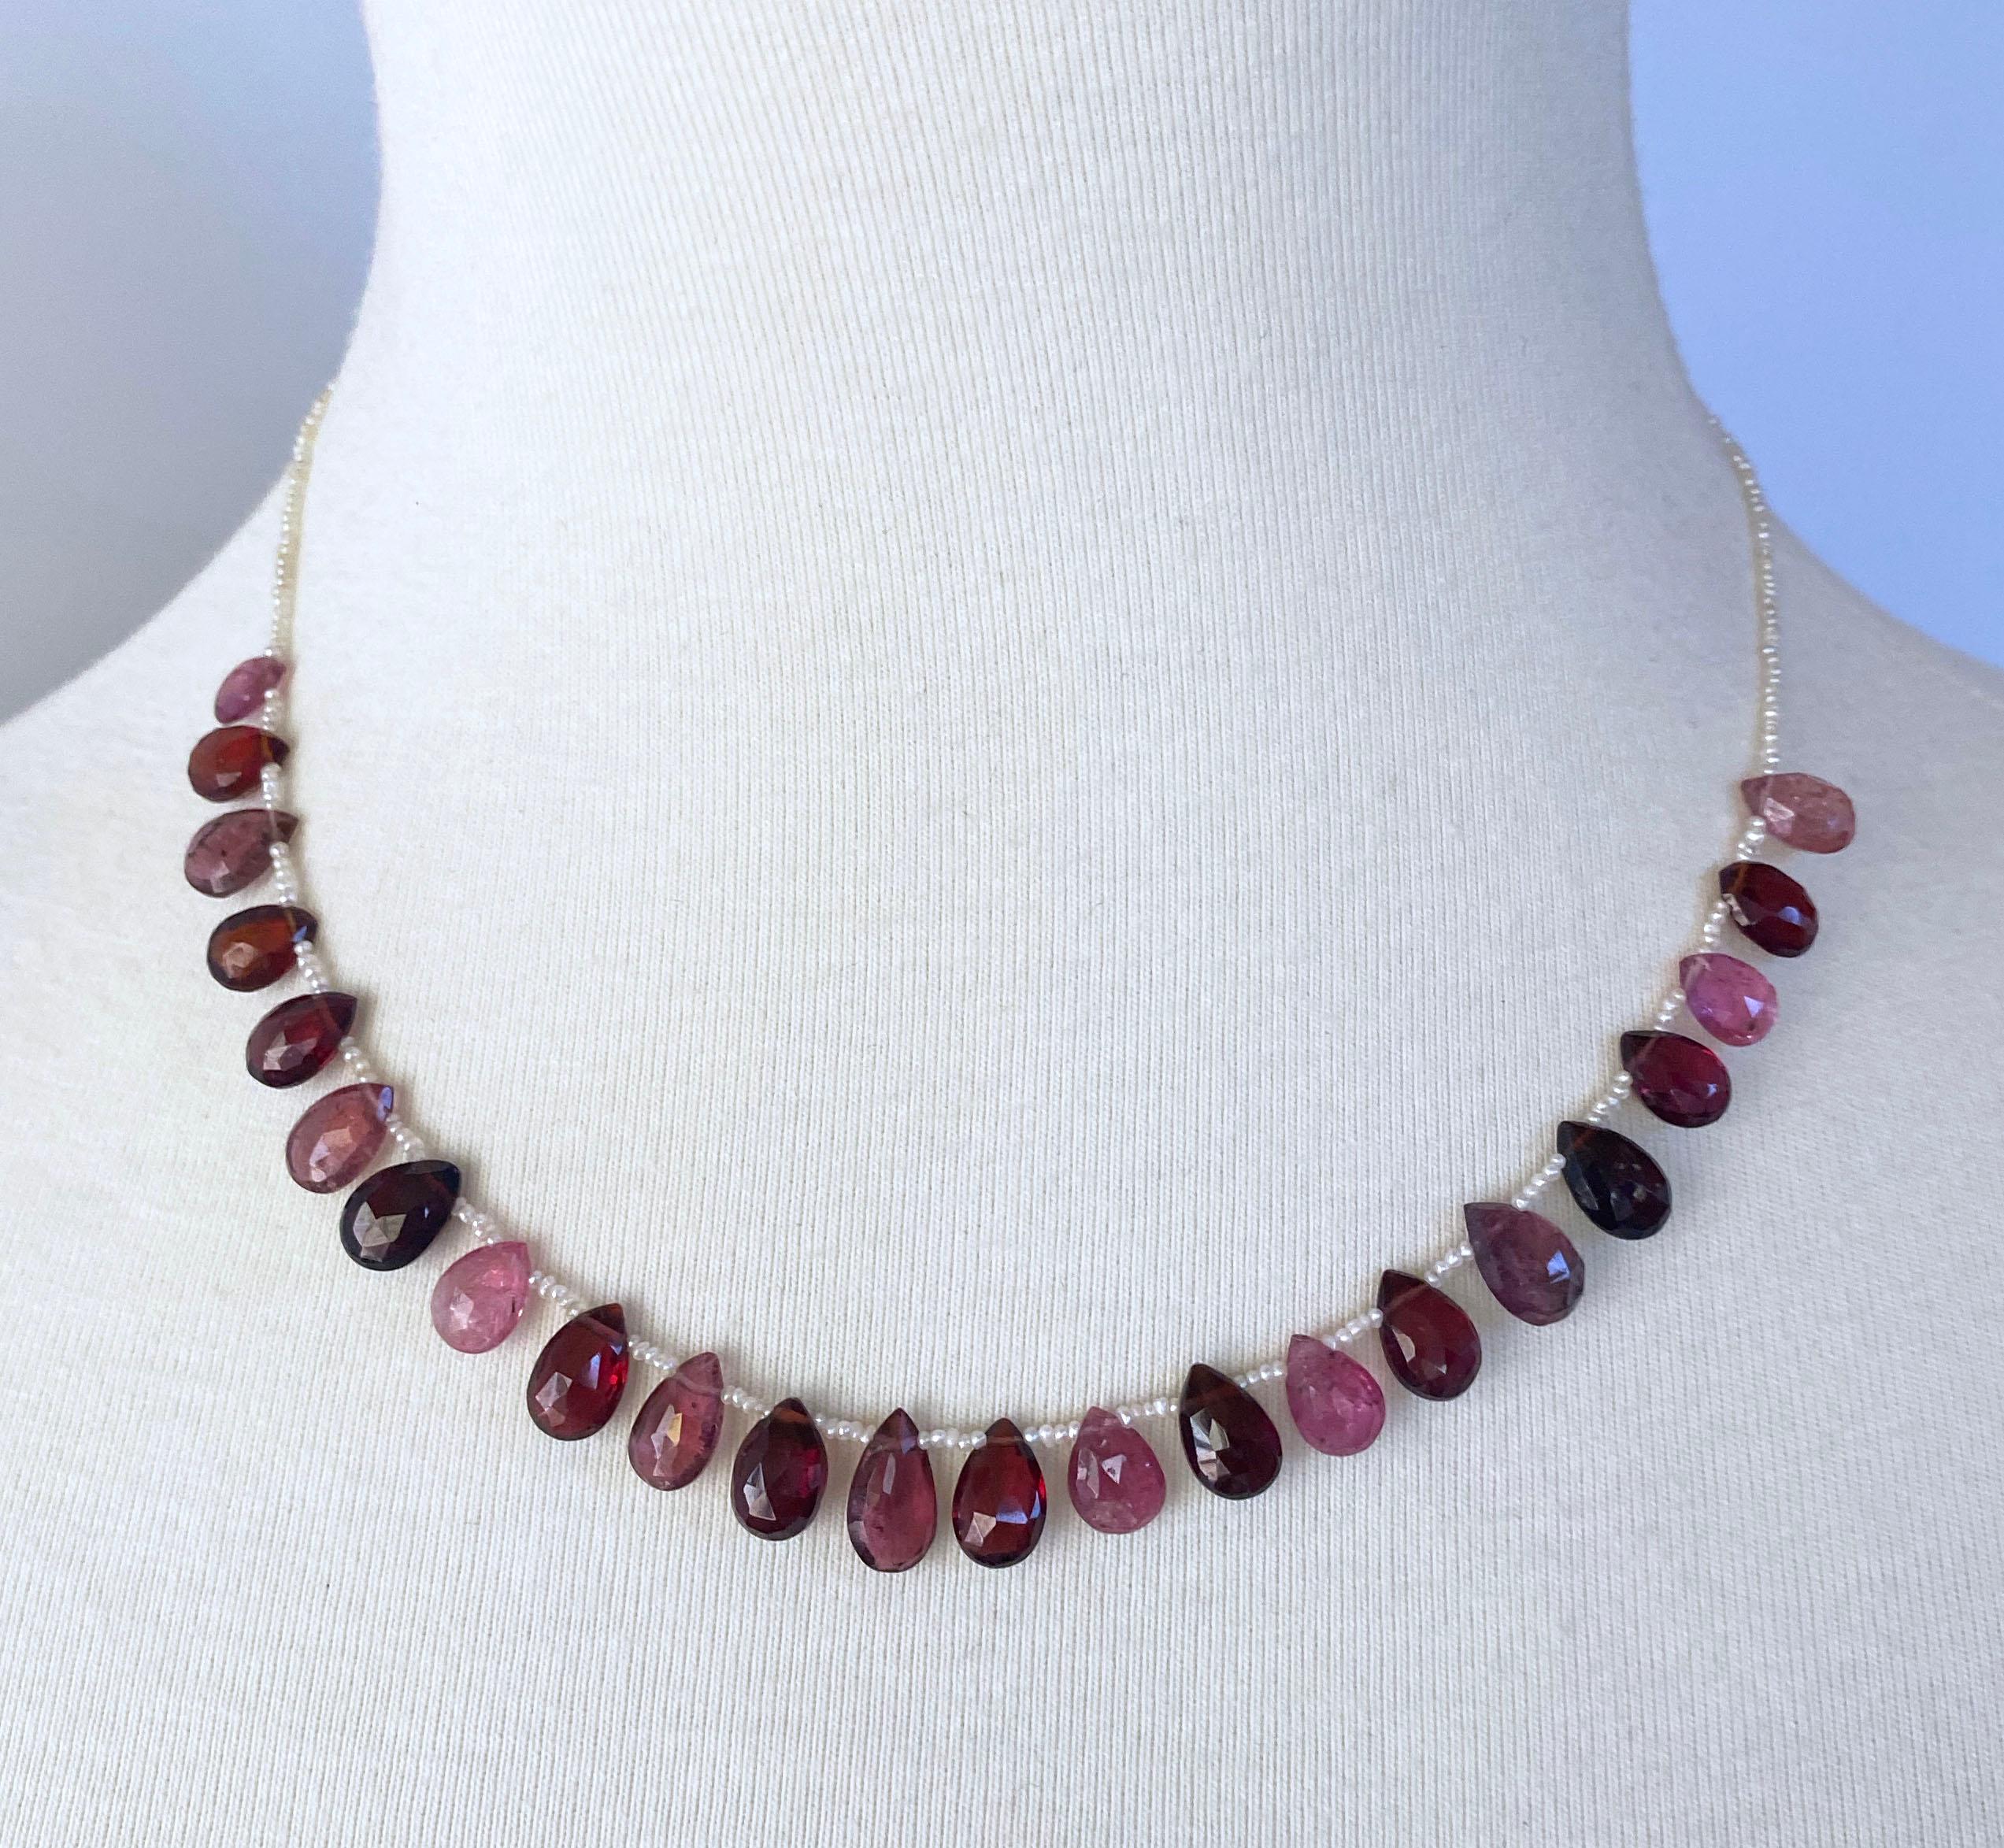 Simple yet bold necklace by Marina J. Made with Natural Seed Pearls adorned by stunning multi colored Pink and Red Tourmaline and Garnet Briolettes. These amazing stones illuminate and radiate gorgeous hues of fuchsia, pink and red when hit with